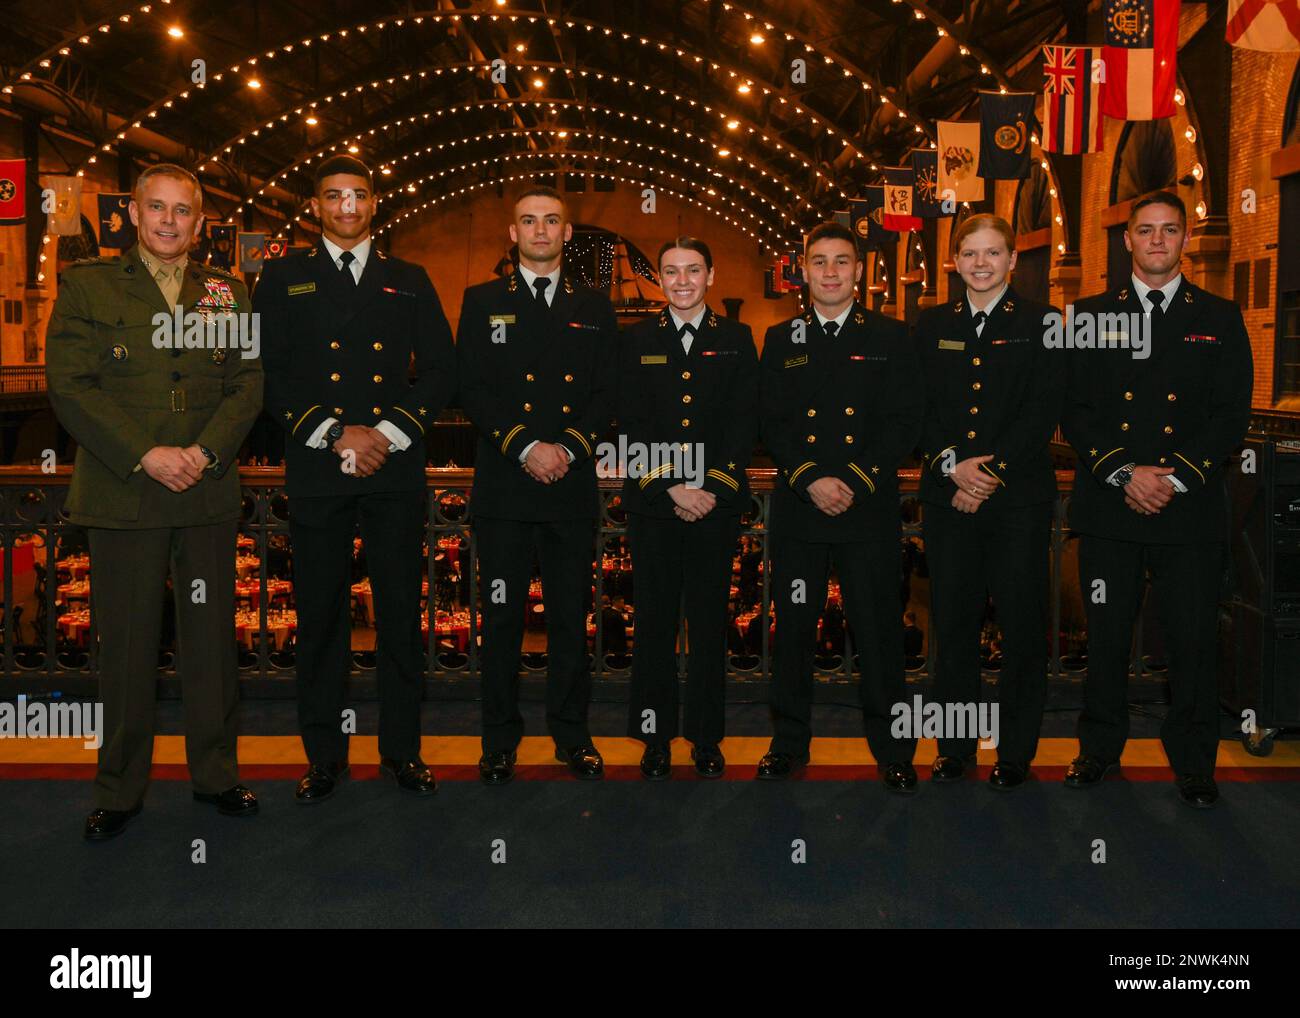 Lt. Gen. Matthew G. Glavy, Deputy Commandant for Information, poses with U.S. Naval Academy midshipmen selected for cyber contracts during the annual U.S. Marine Corps community dinner at Dahlgren Hall Feb 7, 2023. Upon graduation and commissioning as a second lieutenant the U.S. Naval Academy midshipmen will receive orders to The Basic School followed by the Cyberspace Operations Officers Course. Upon completion of their primary military occupational school (PMOS) they will earn the 1702 MOS, Cyberspace Warfare Officer. New Cyberspace Warfare Officers typically fill roles on the Marine Corps' Stock Photo